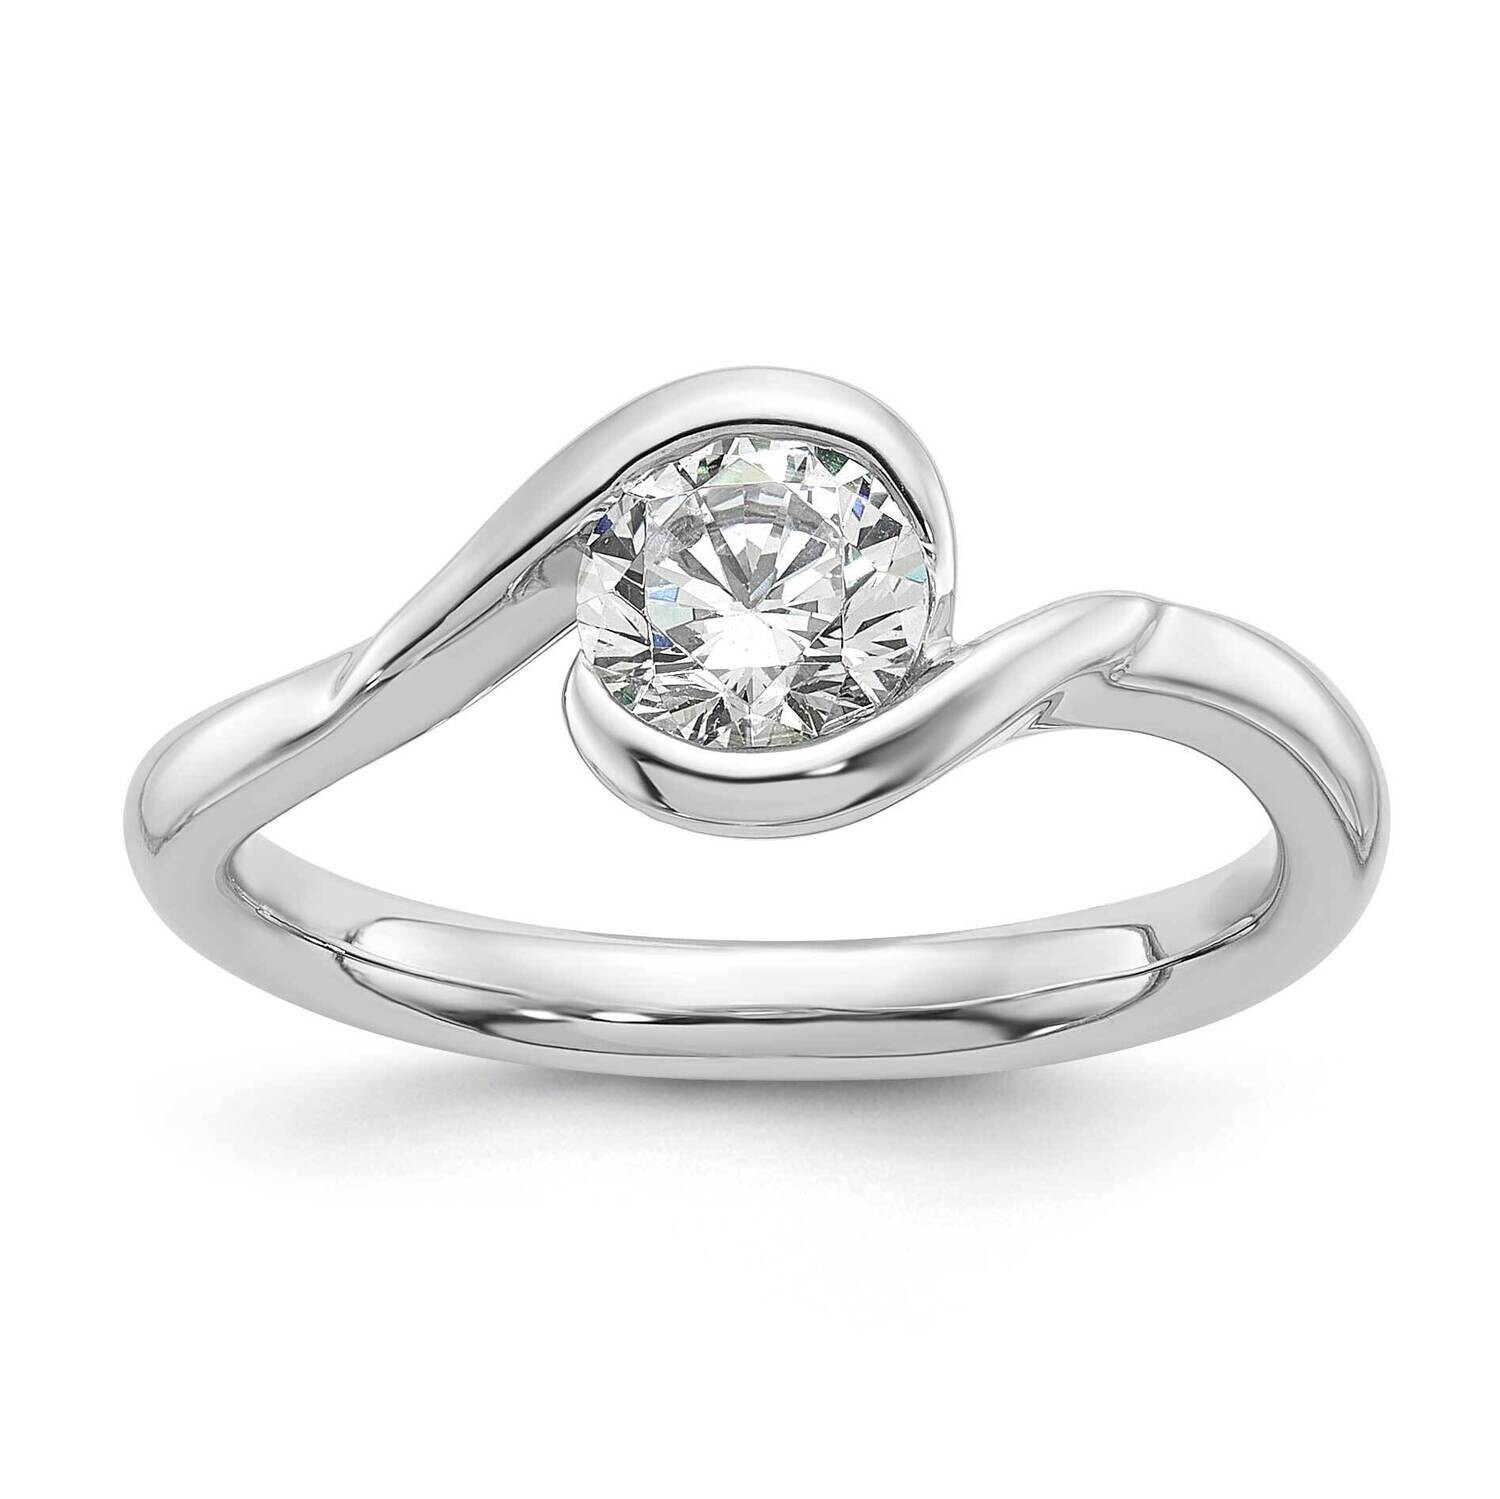 3/4 Carat 5.80 mm Half-Bezel Bypass Round Solitaire Engagement Ring Mounting 14k White Gold RM1955E-075-W